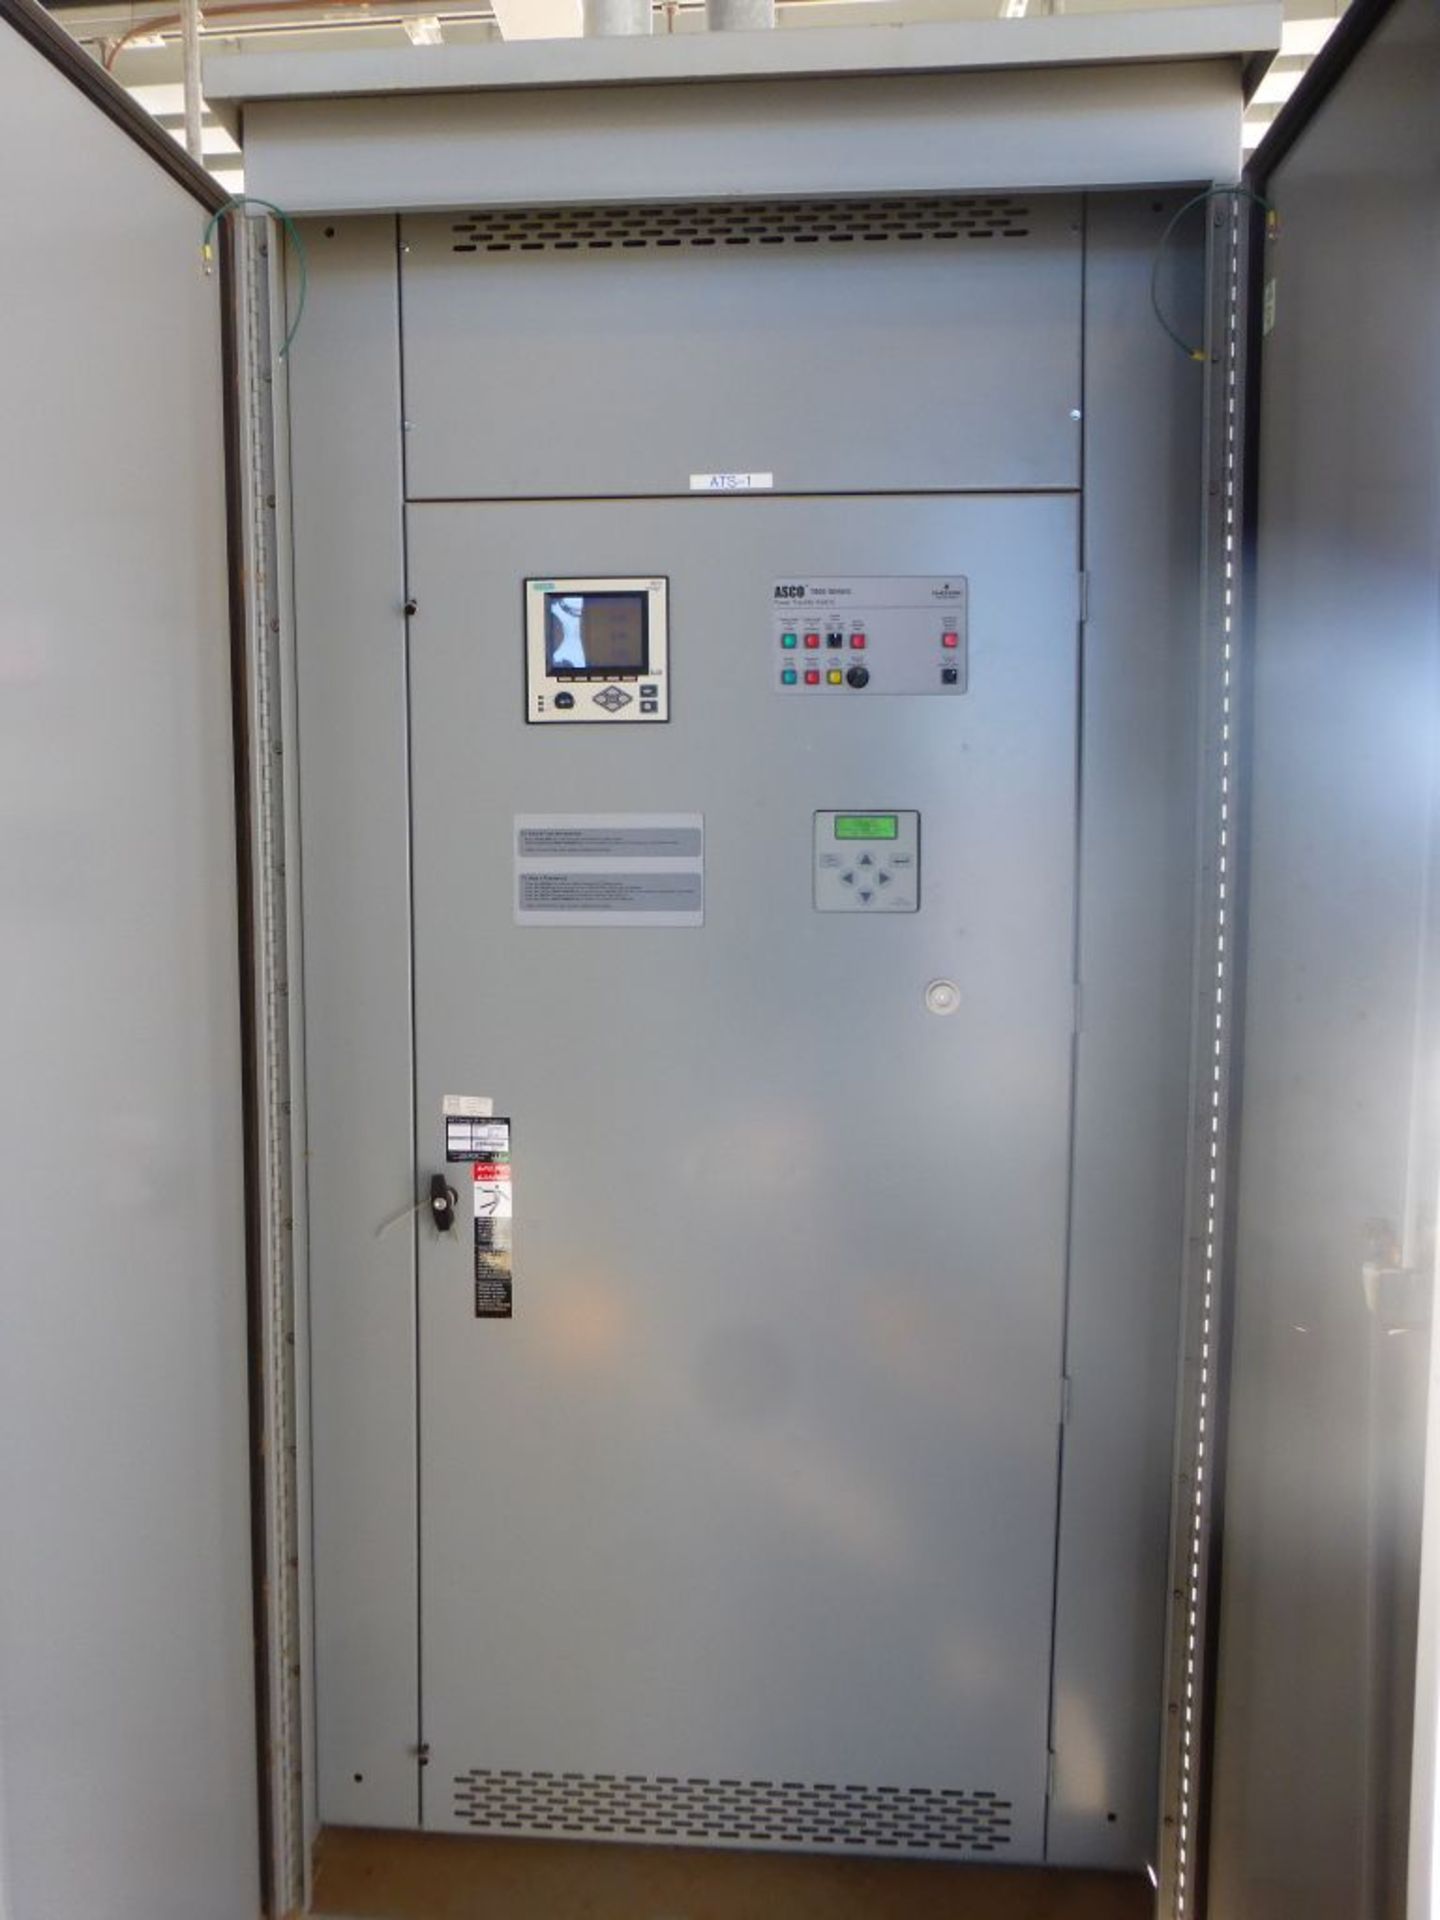 ASCO 7000 Series Power Transfer Switch | Lot Loading Fee: $50 | 800A; 480V; Tag: 233661 - Image 3 of 11